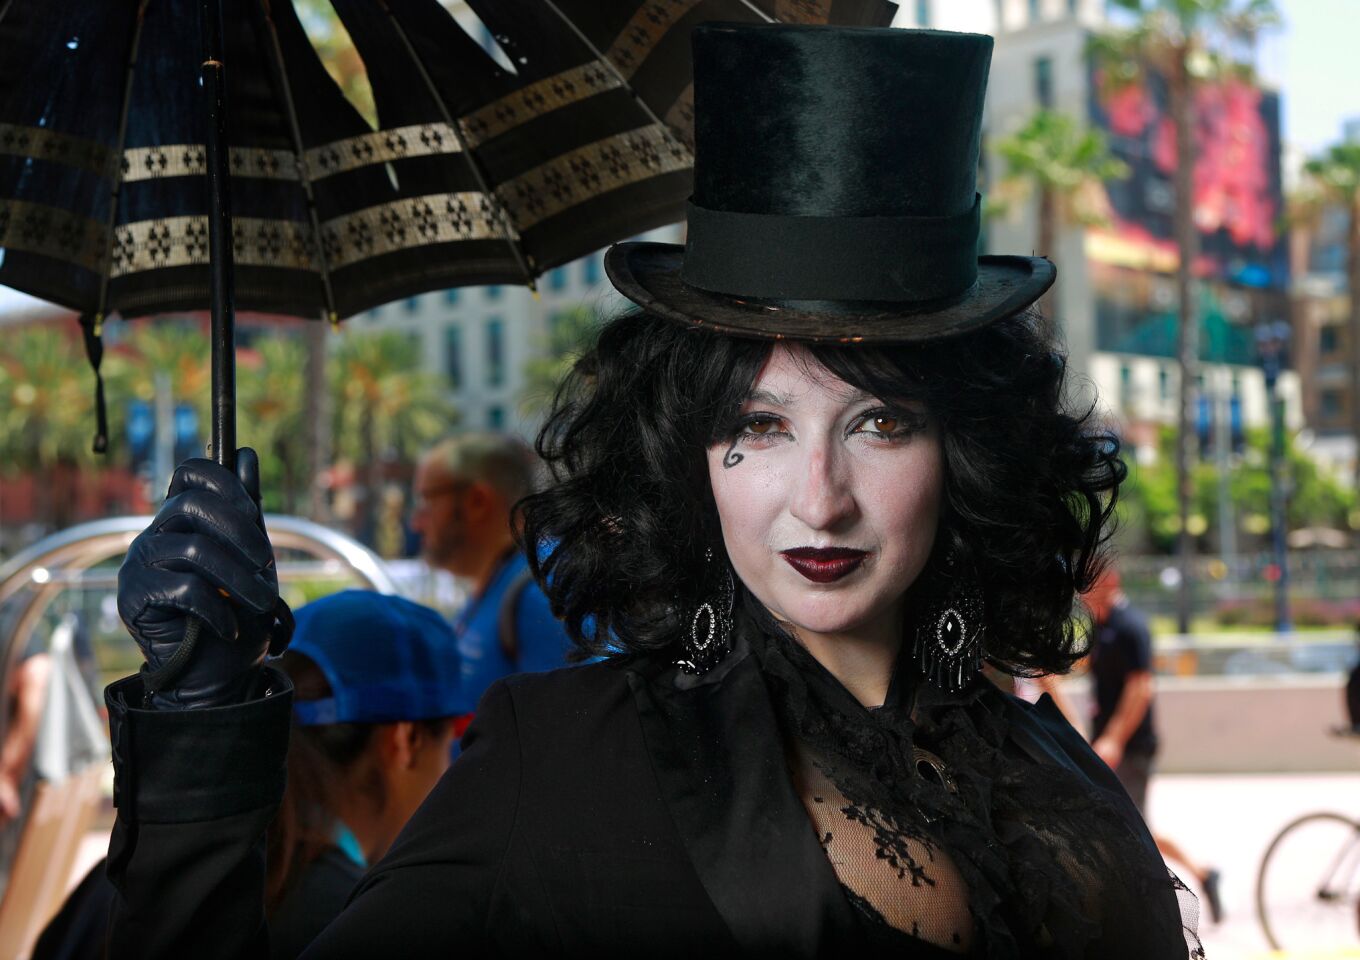 Tiffany Knight of New York City dressed as Death at Comic-Con in San Diego on July 20.